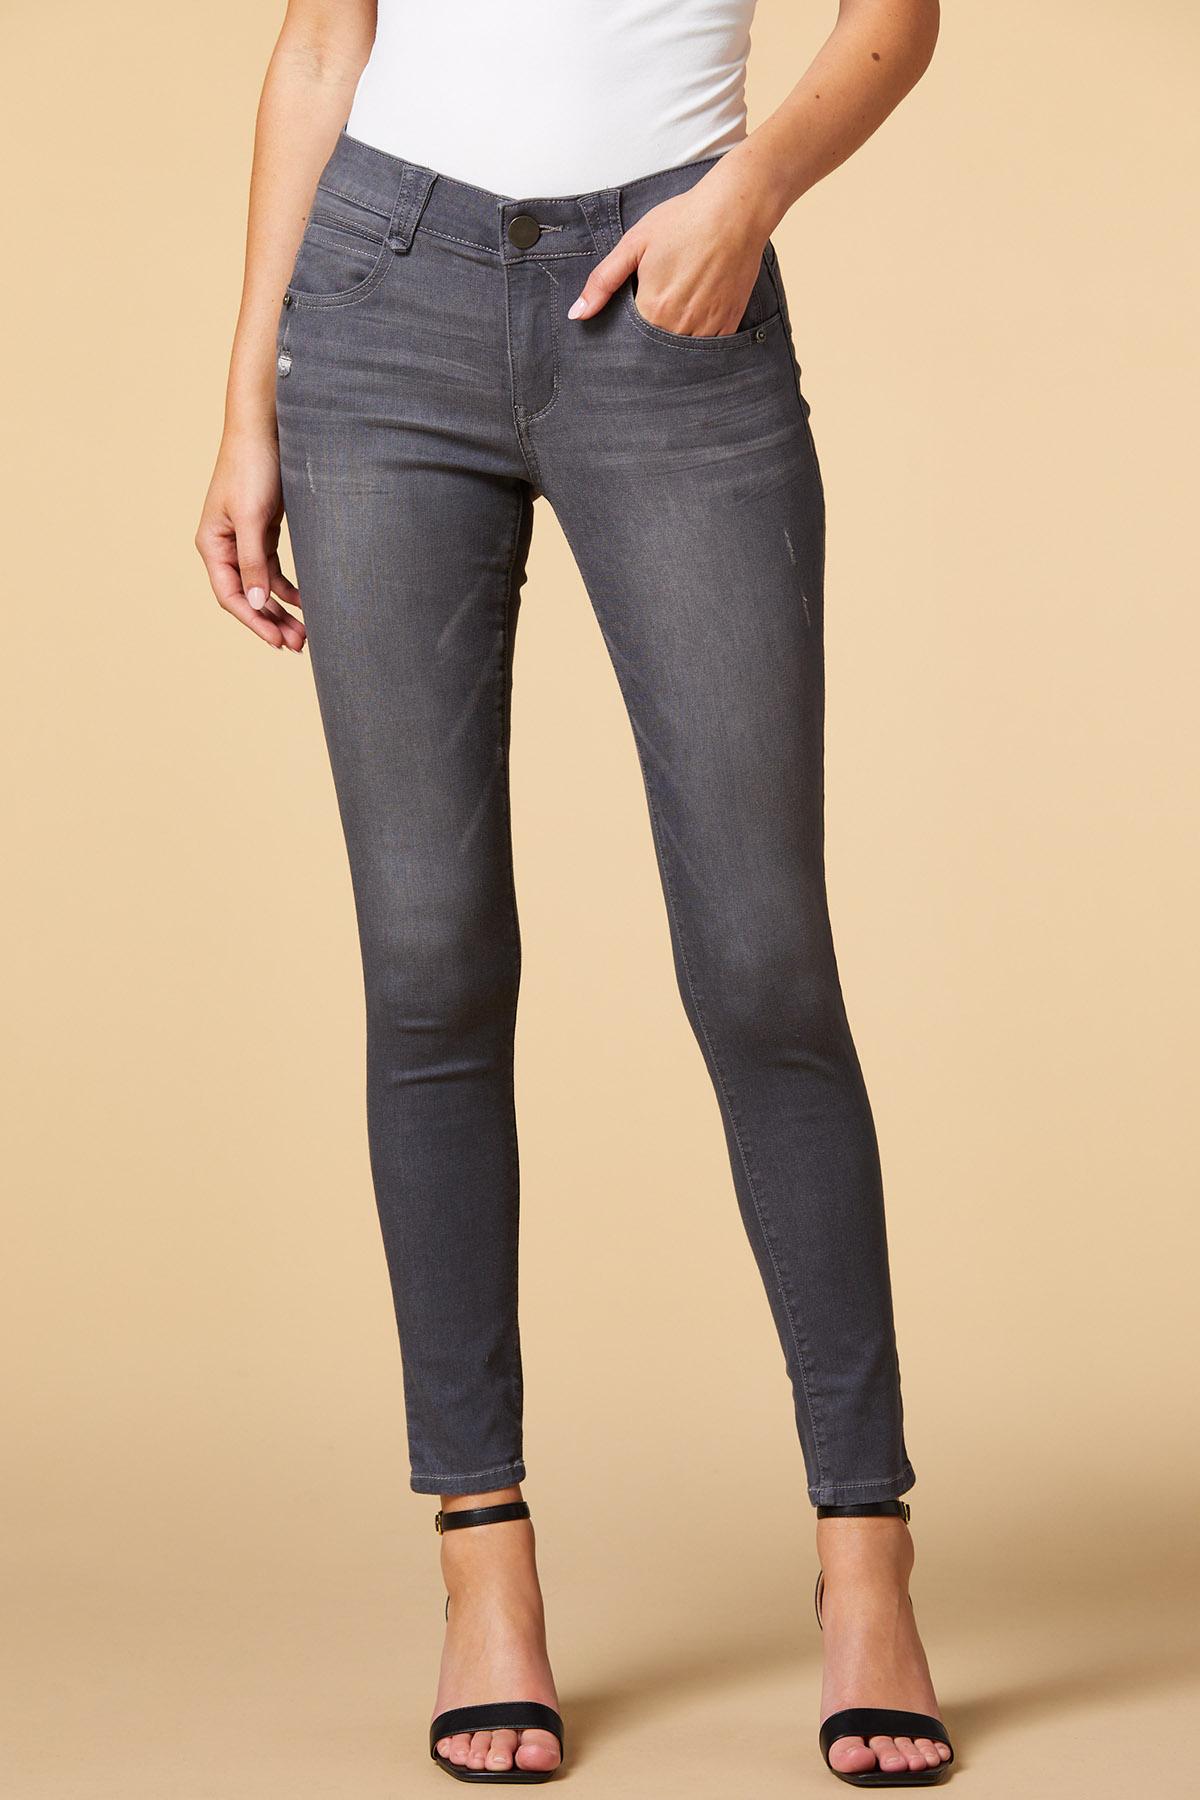 Gray Area Jeggings